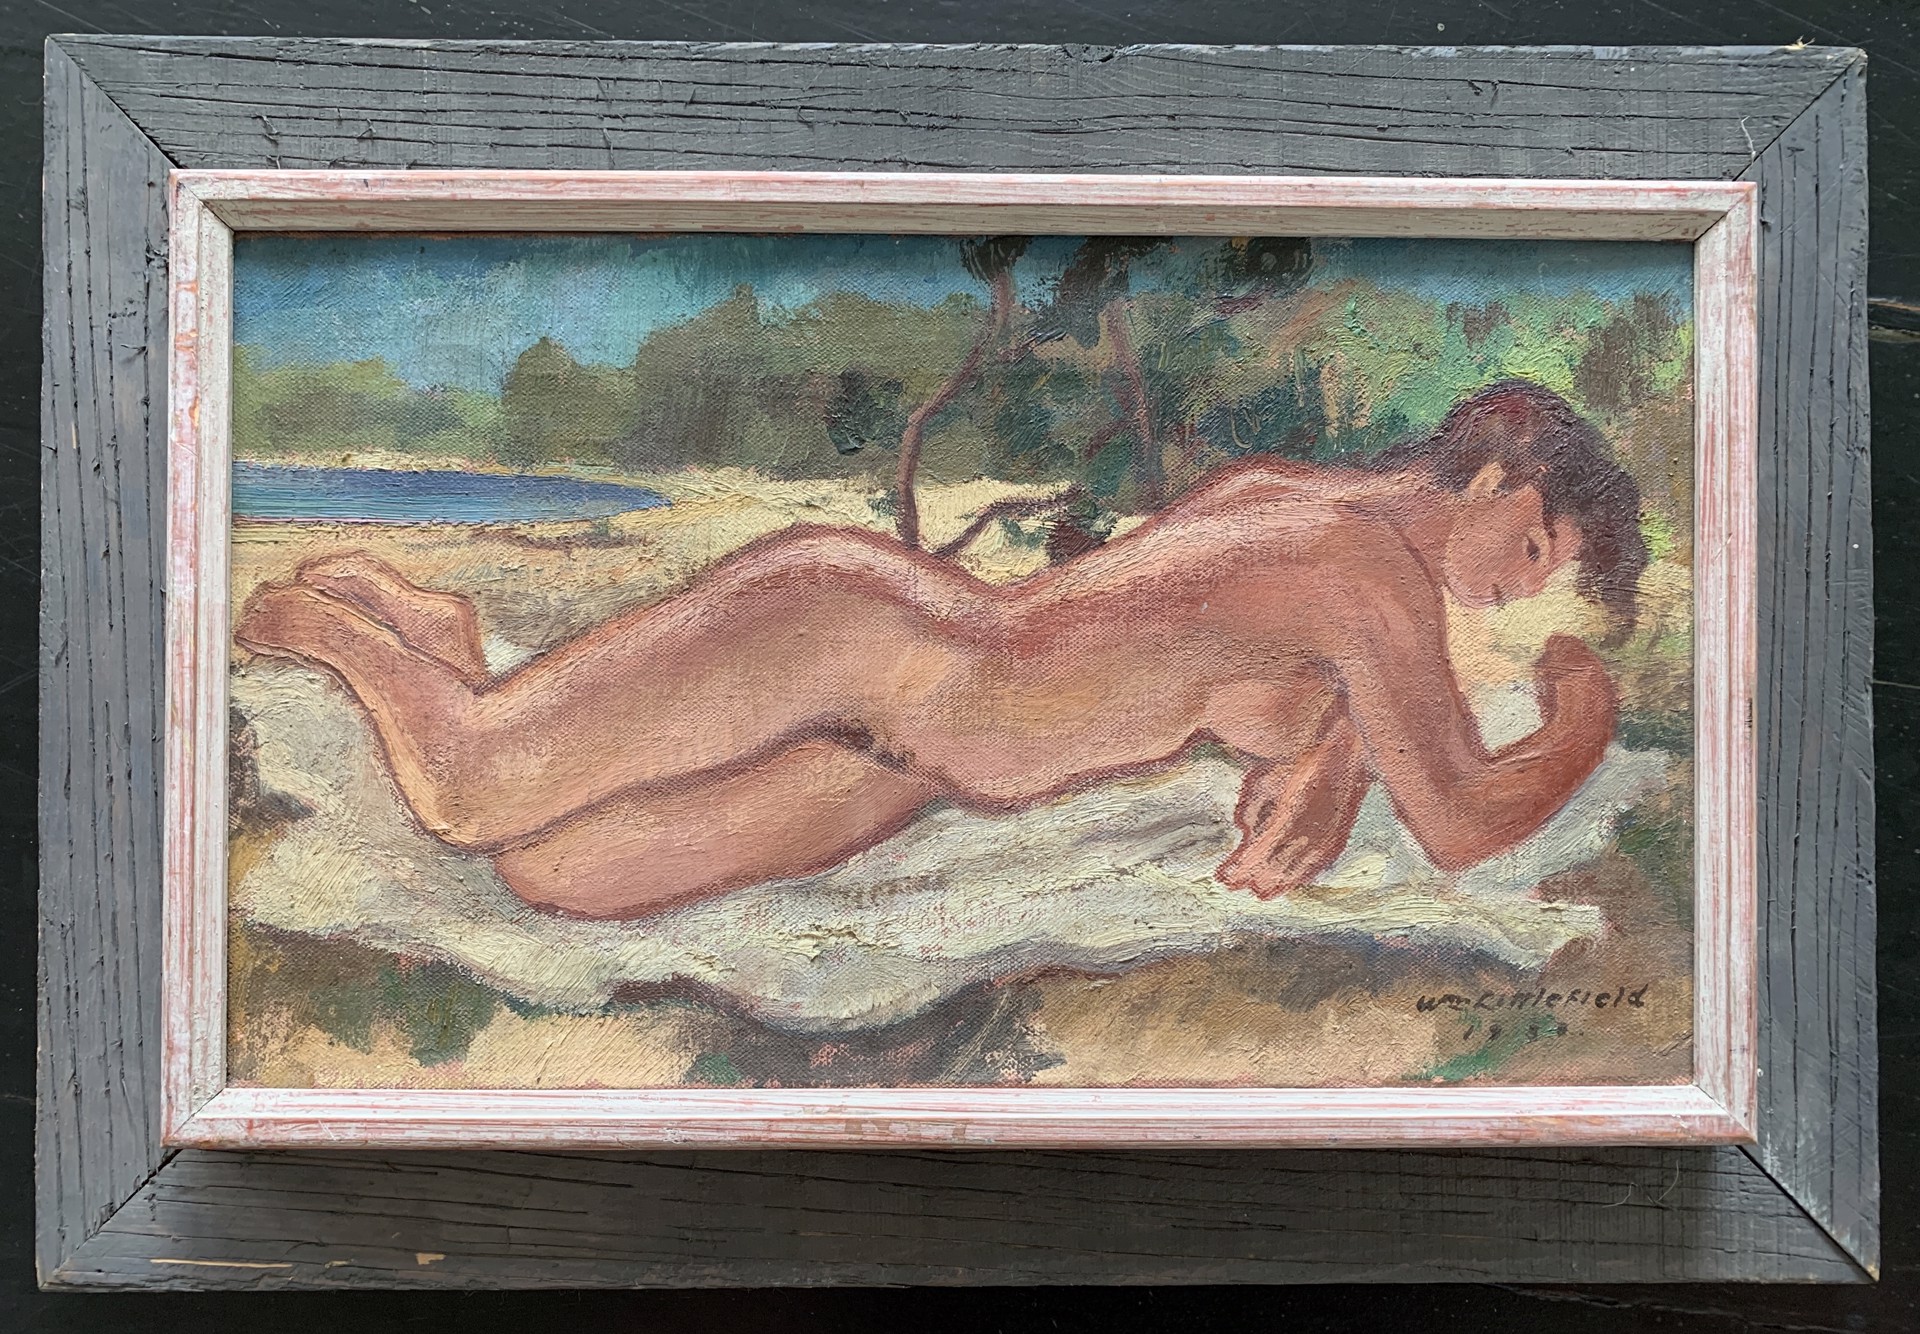 Female Nude (Long Pond, Falmouth) by William H. Littlefield